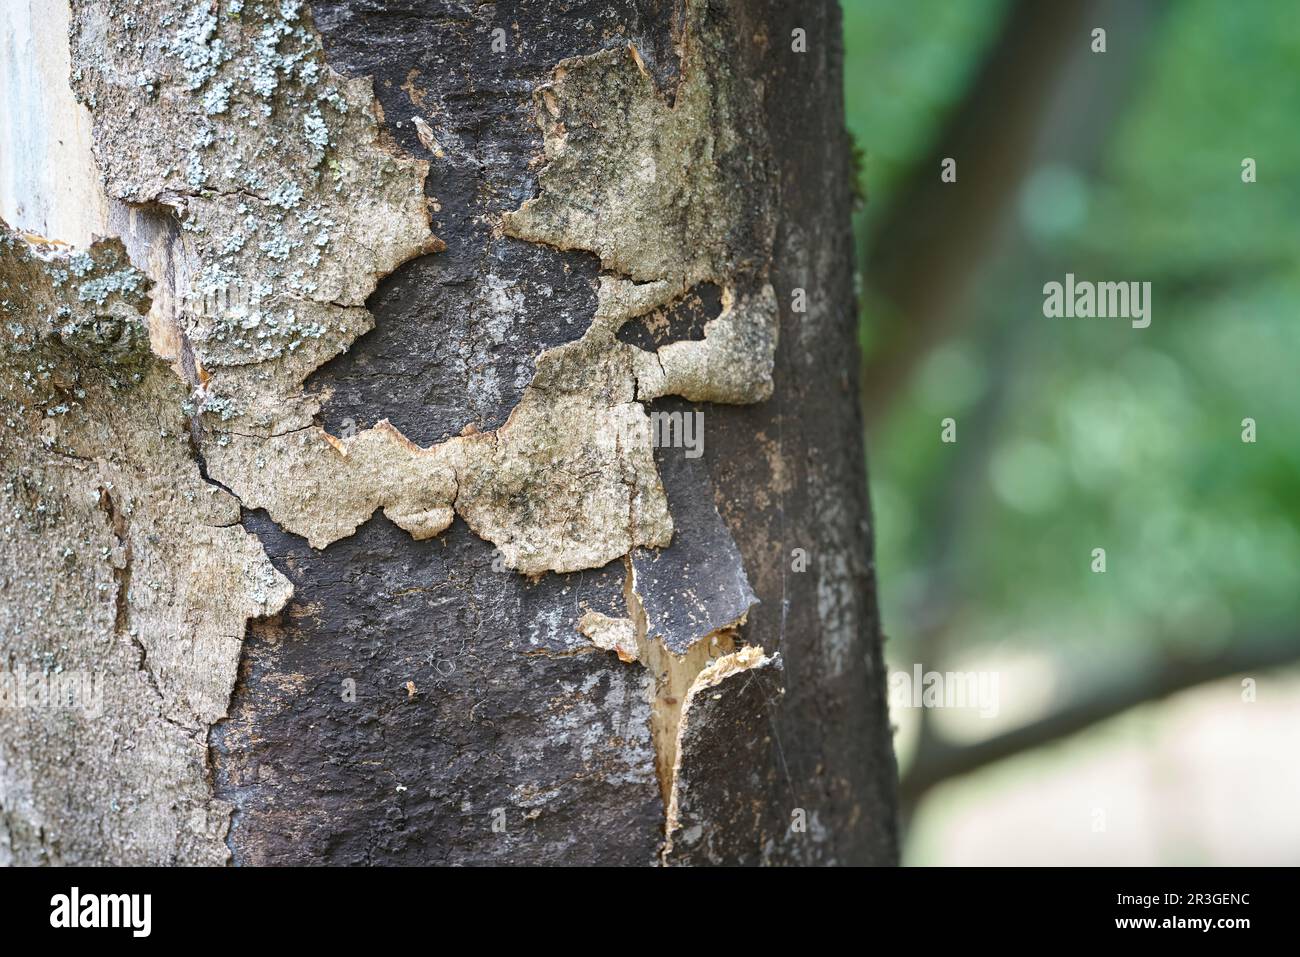 Dead sycamore maple with symptoms of sooty bark disease caused by the fungus Cryptostroma corticale Stock Photo